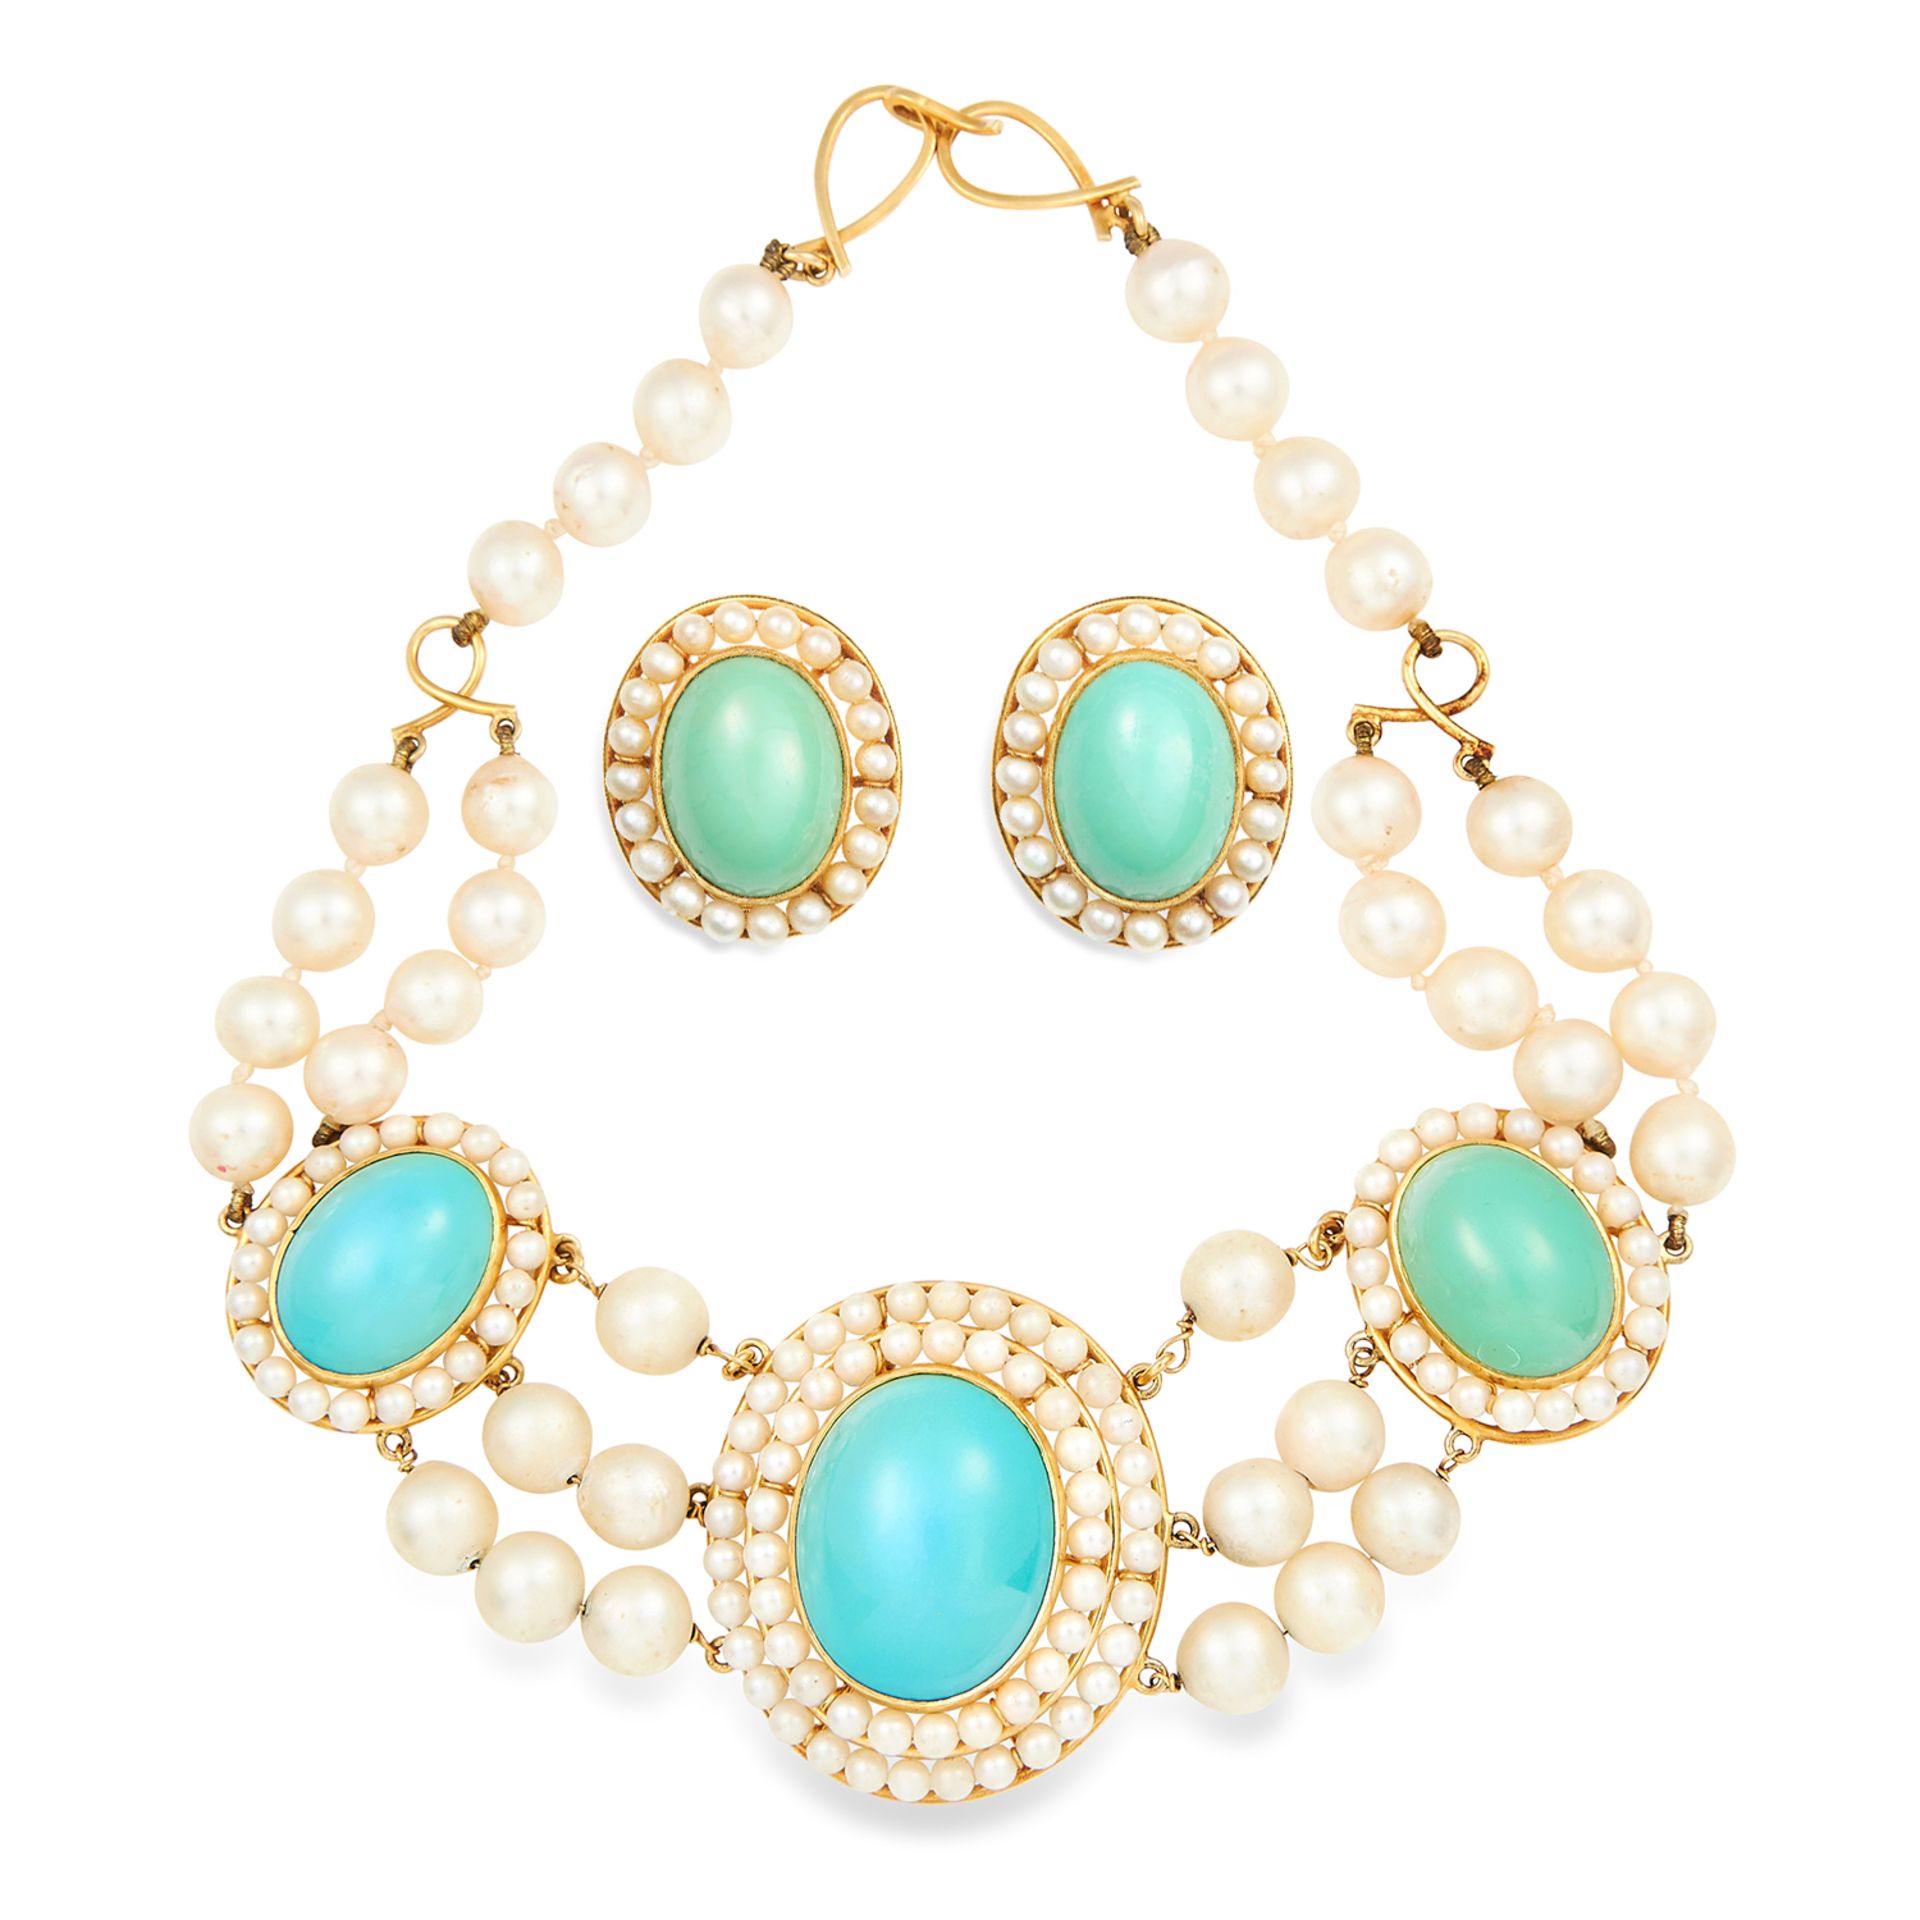 A TURQUOISE AND PEARL EARRINGS AND NECKLACE SUITE in 18ct yellow gold, set with cabochon turquoise